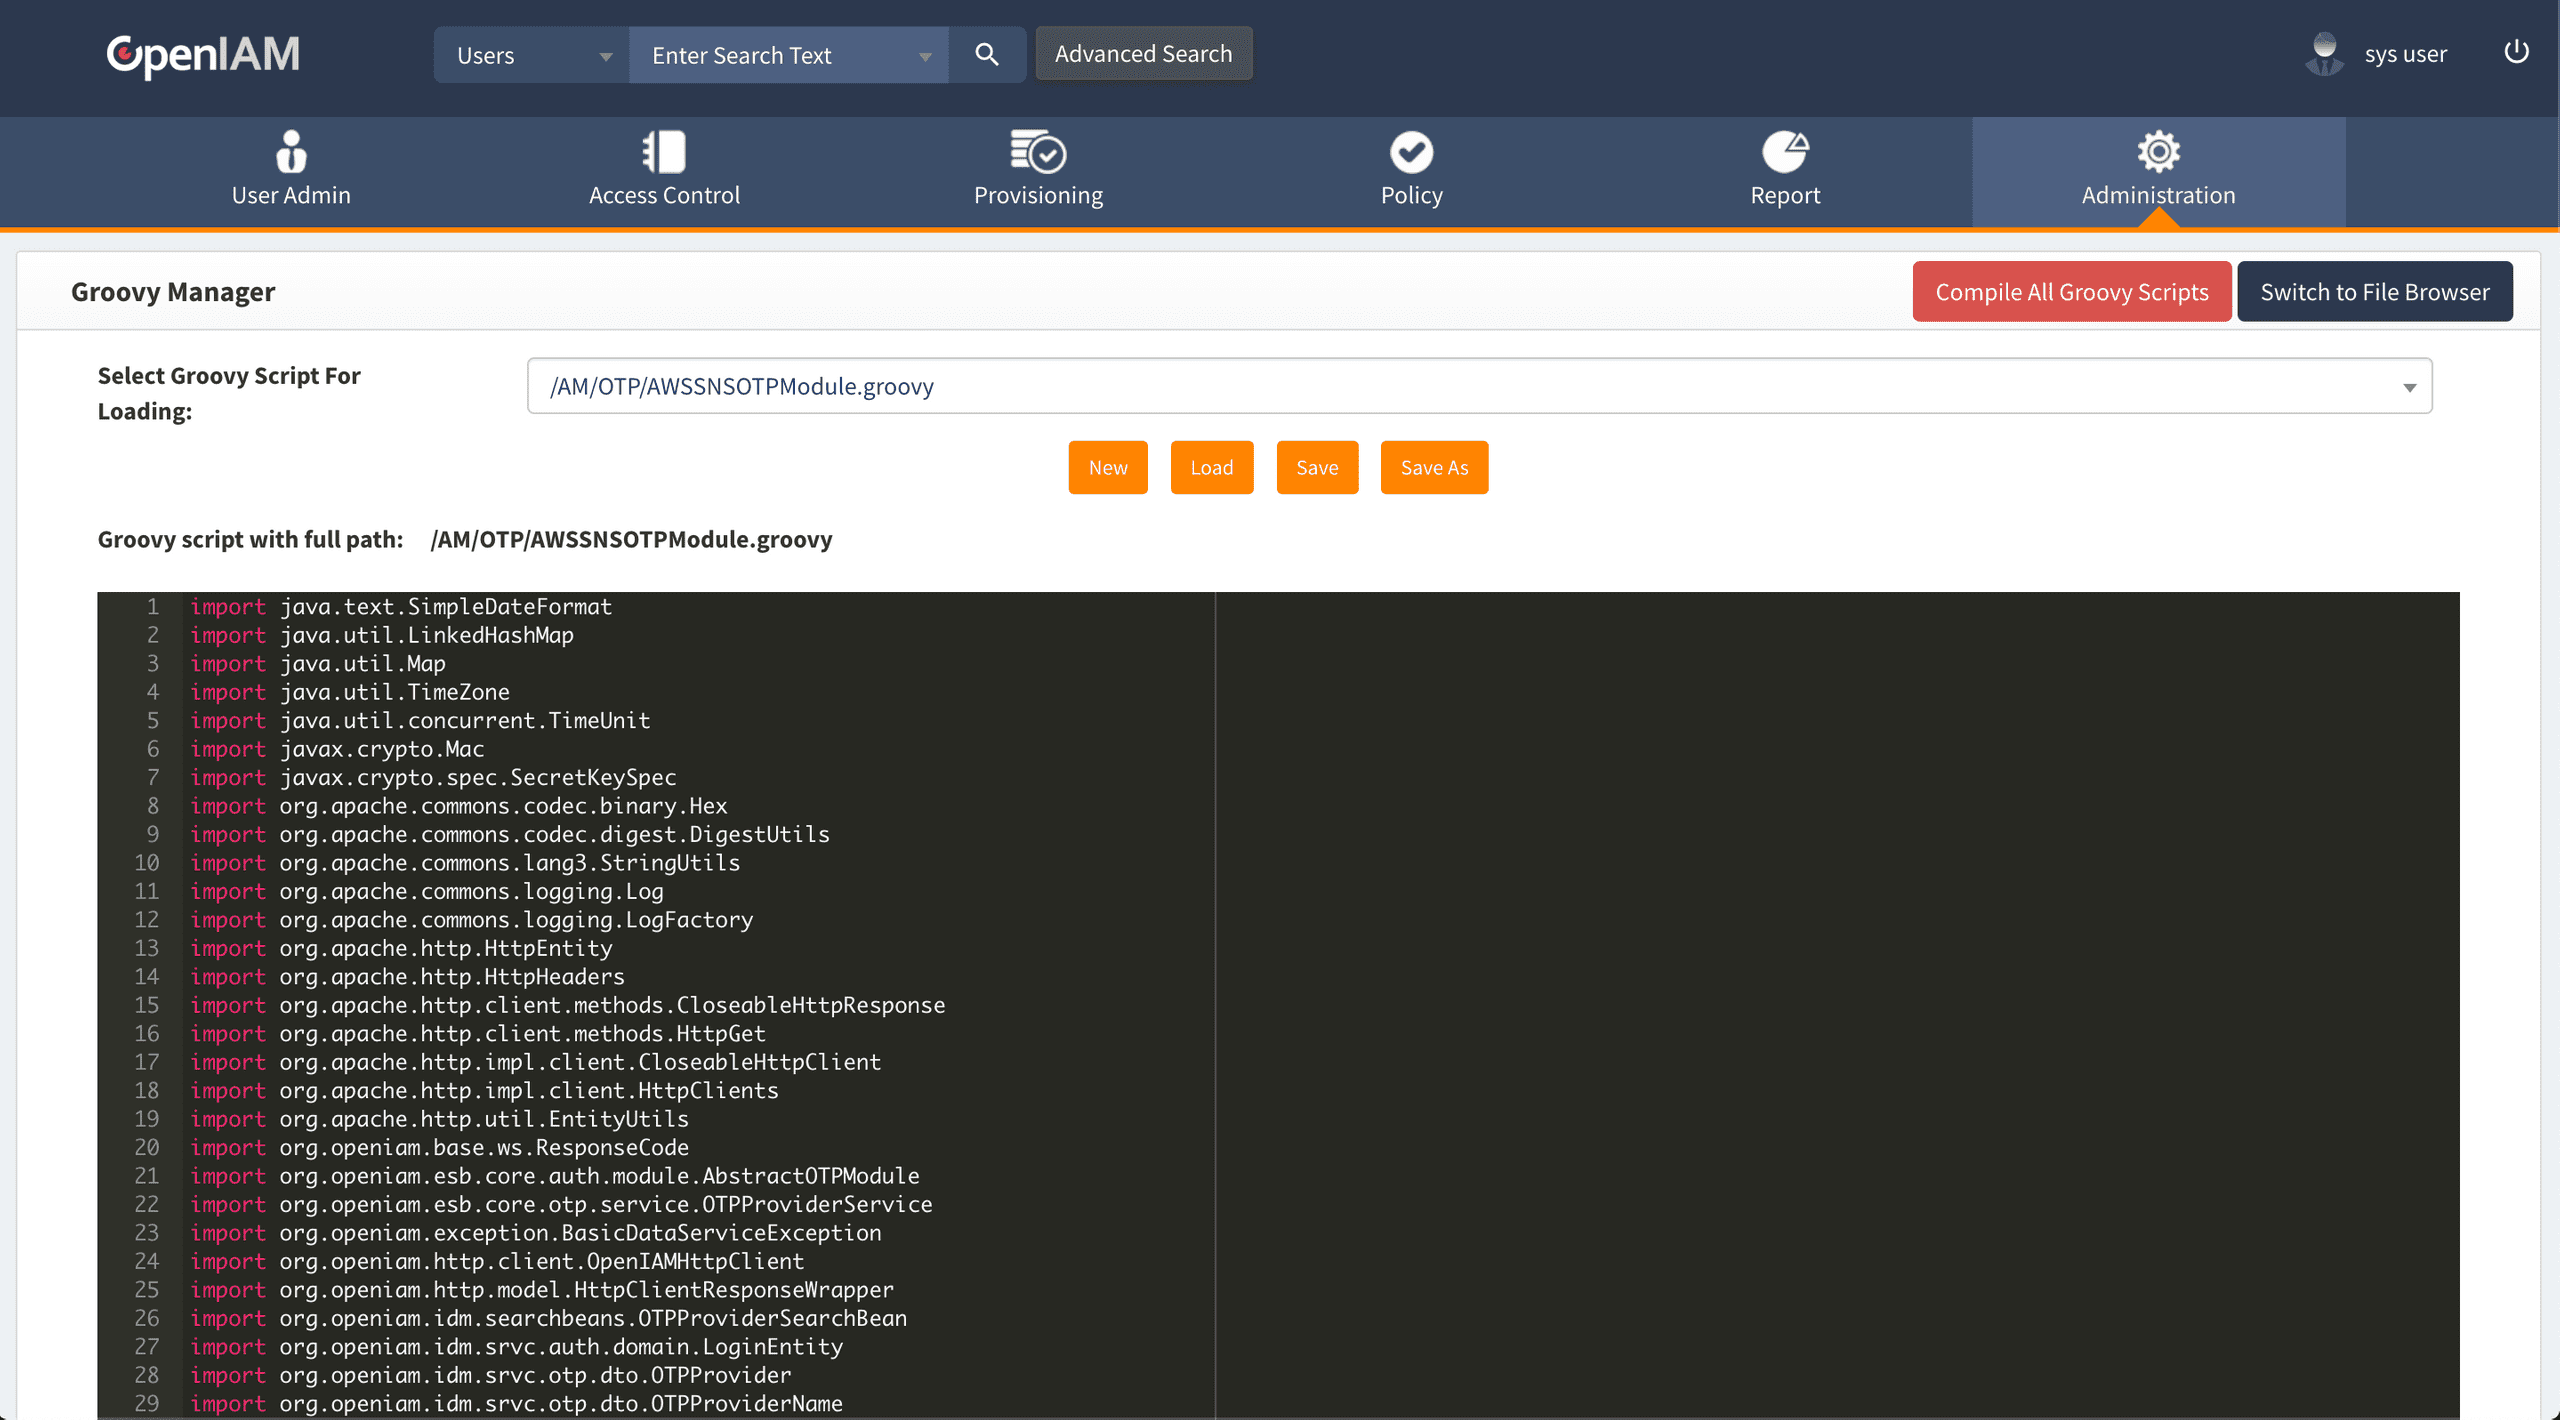 OpenIAM Groovy Script Manager